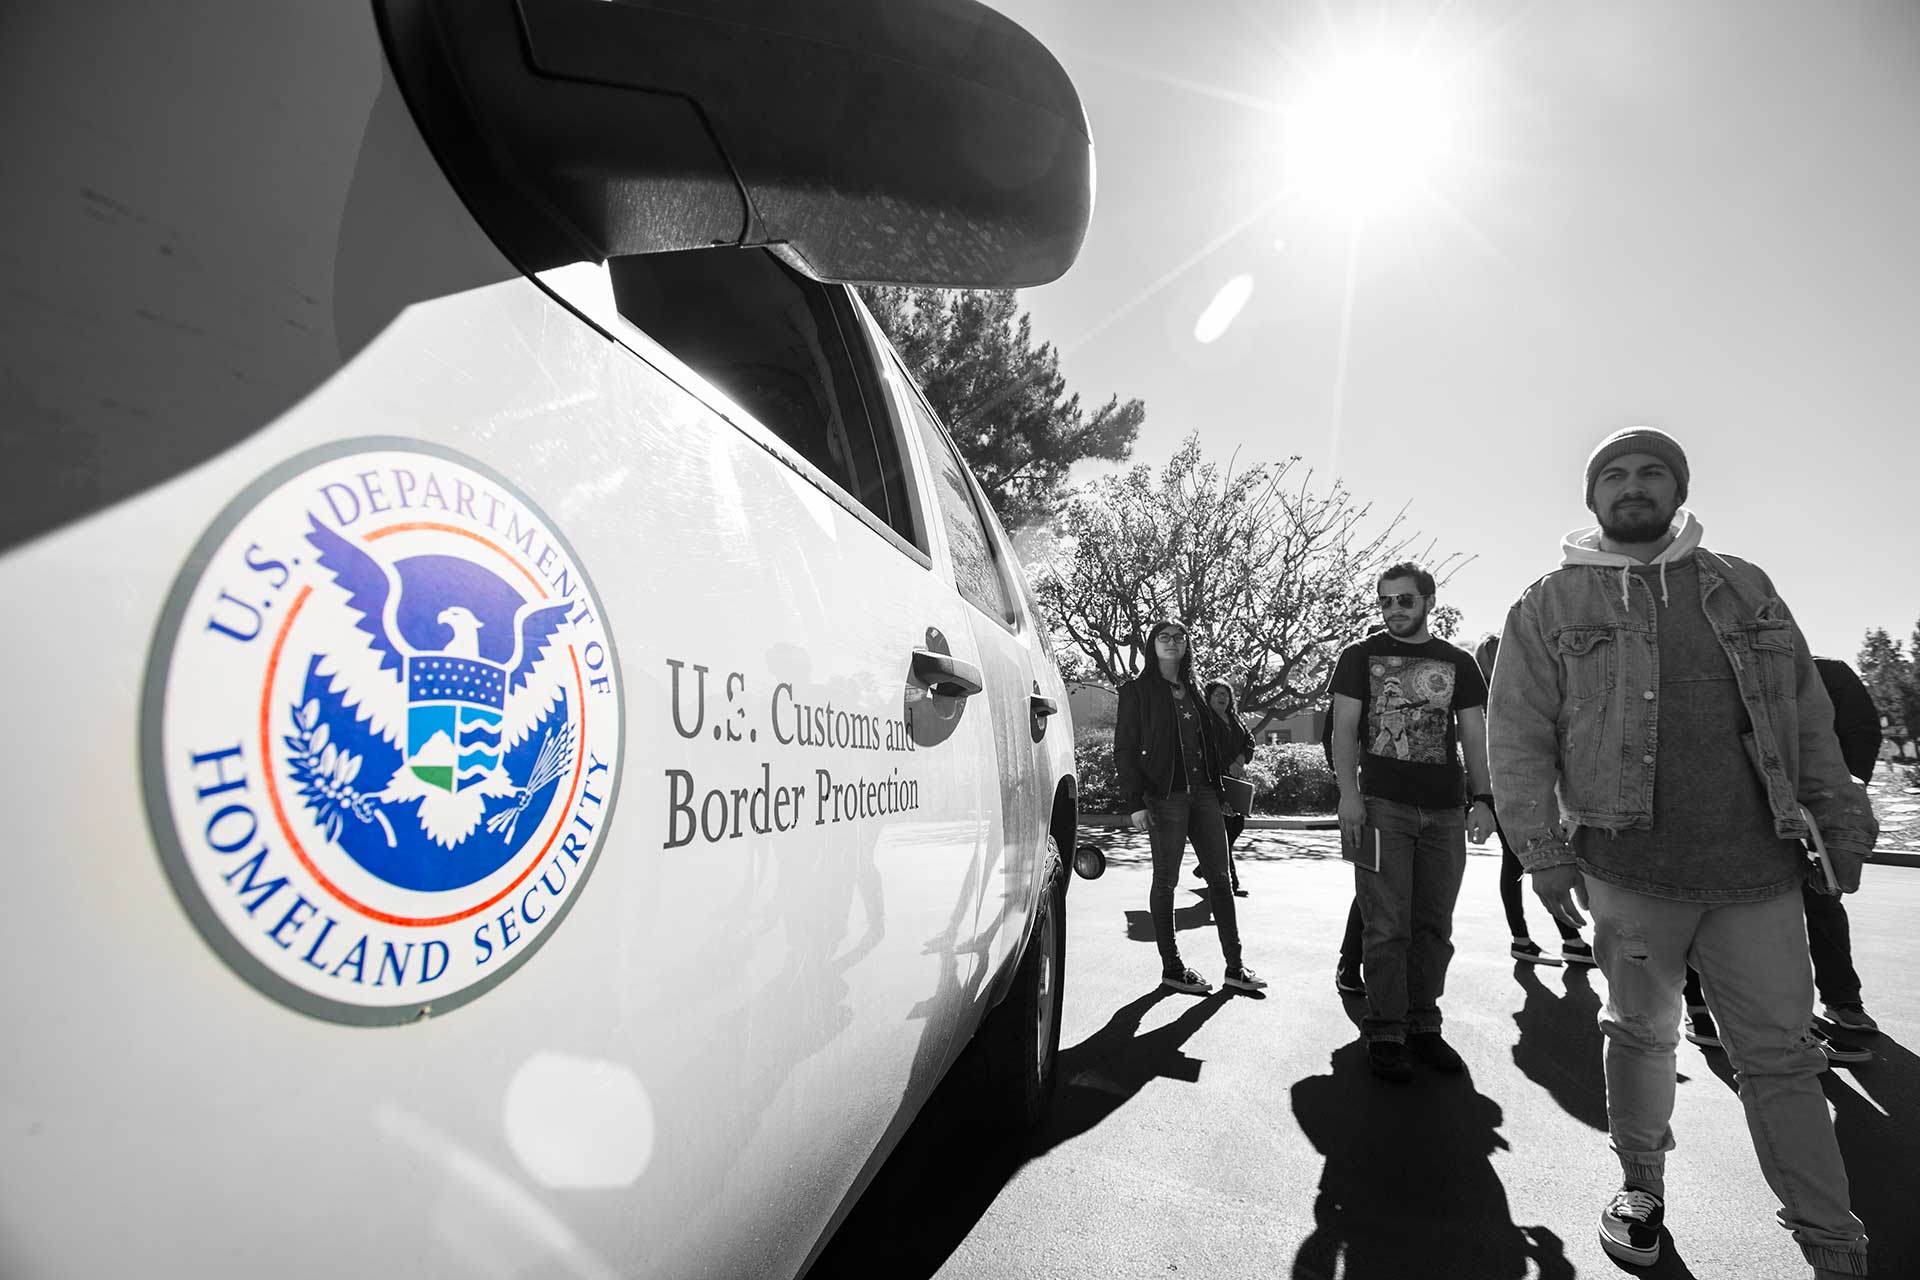 Student looks at Border Patrol vehicle with large Homeland Security emblem on it